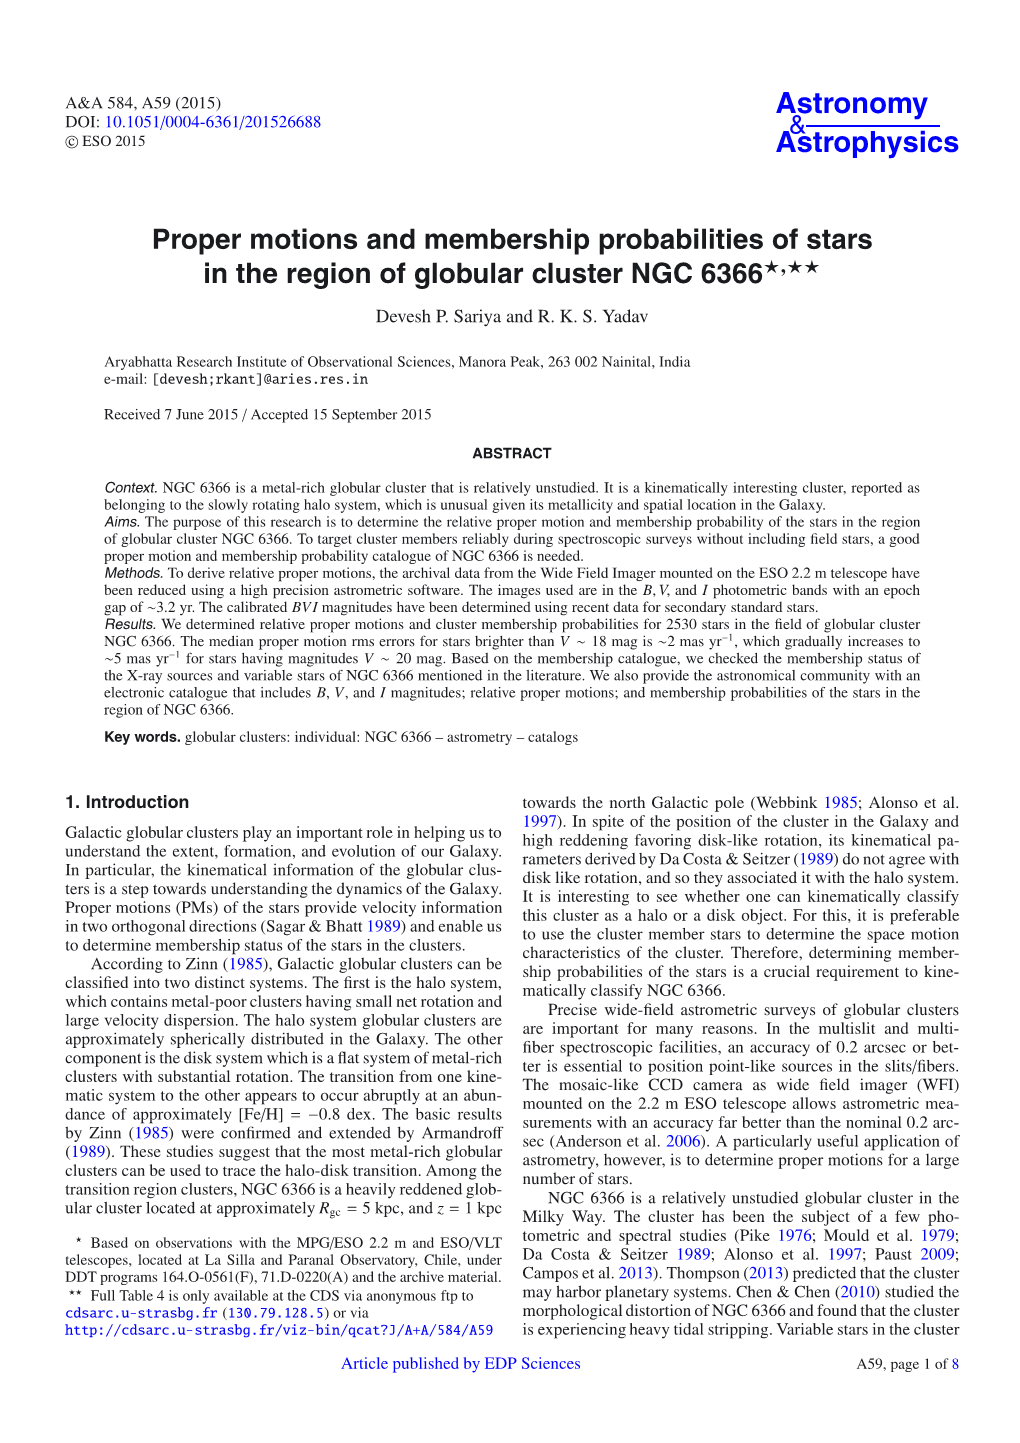 Proper Motions and Membership Probabilities of Stars in the Region of Globular Cluster NGC 6366�,